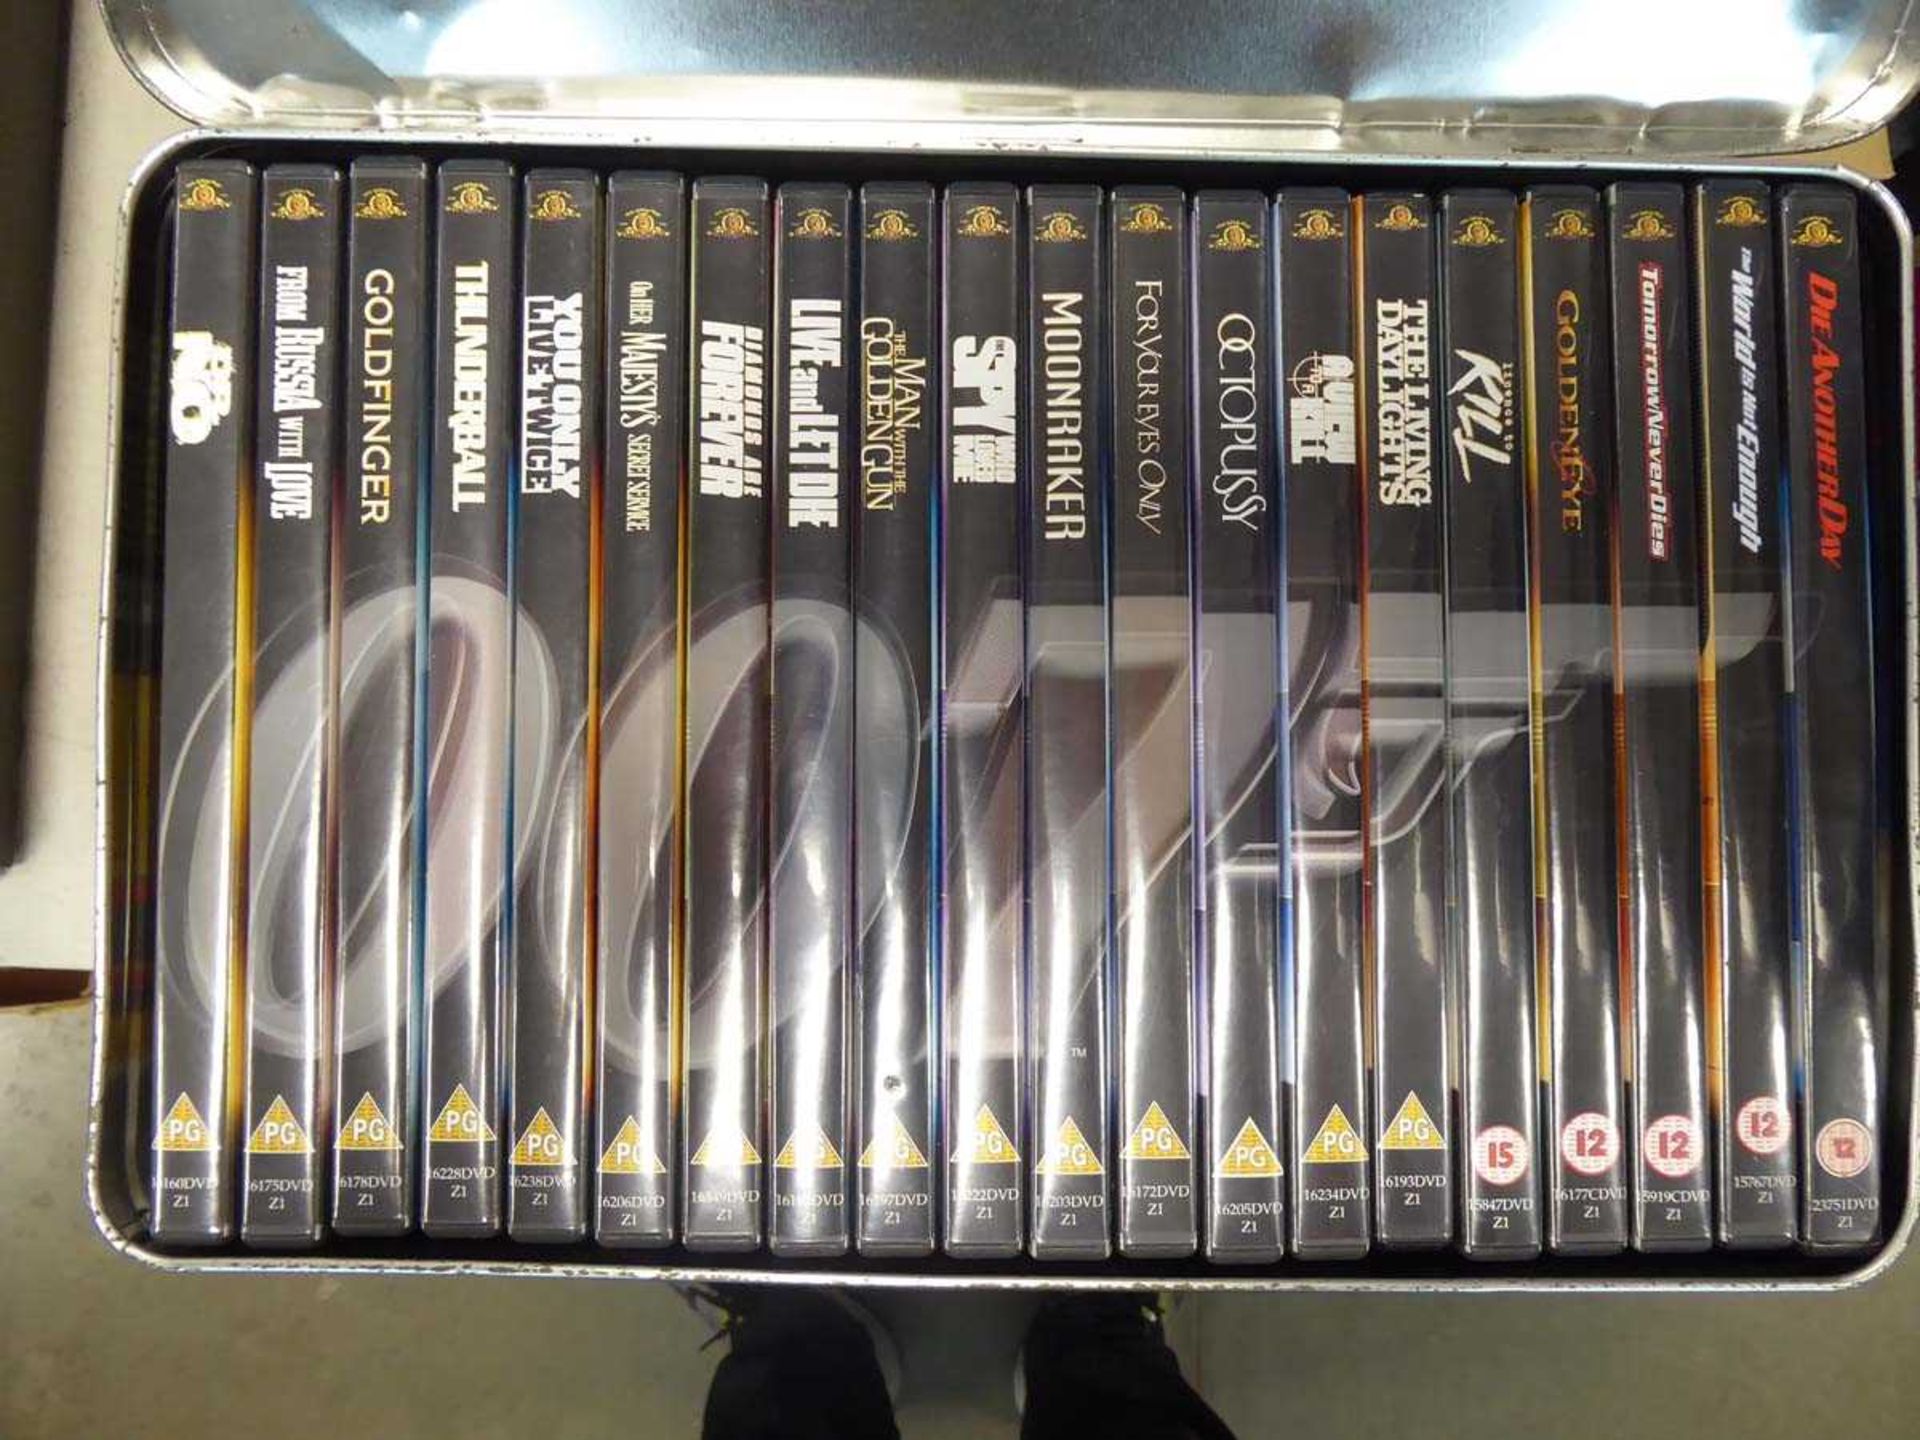 James Bond tin collector's DVD pack set including Dr No through to Die Another Day